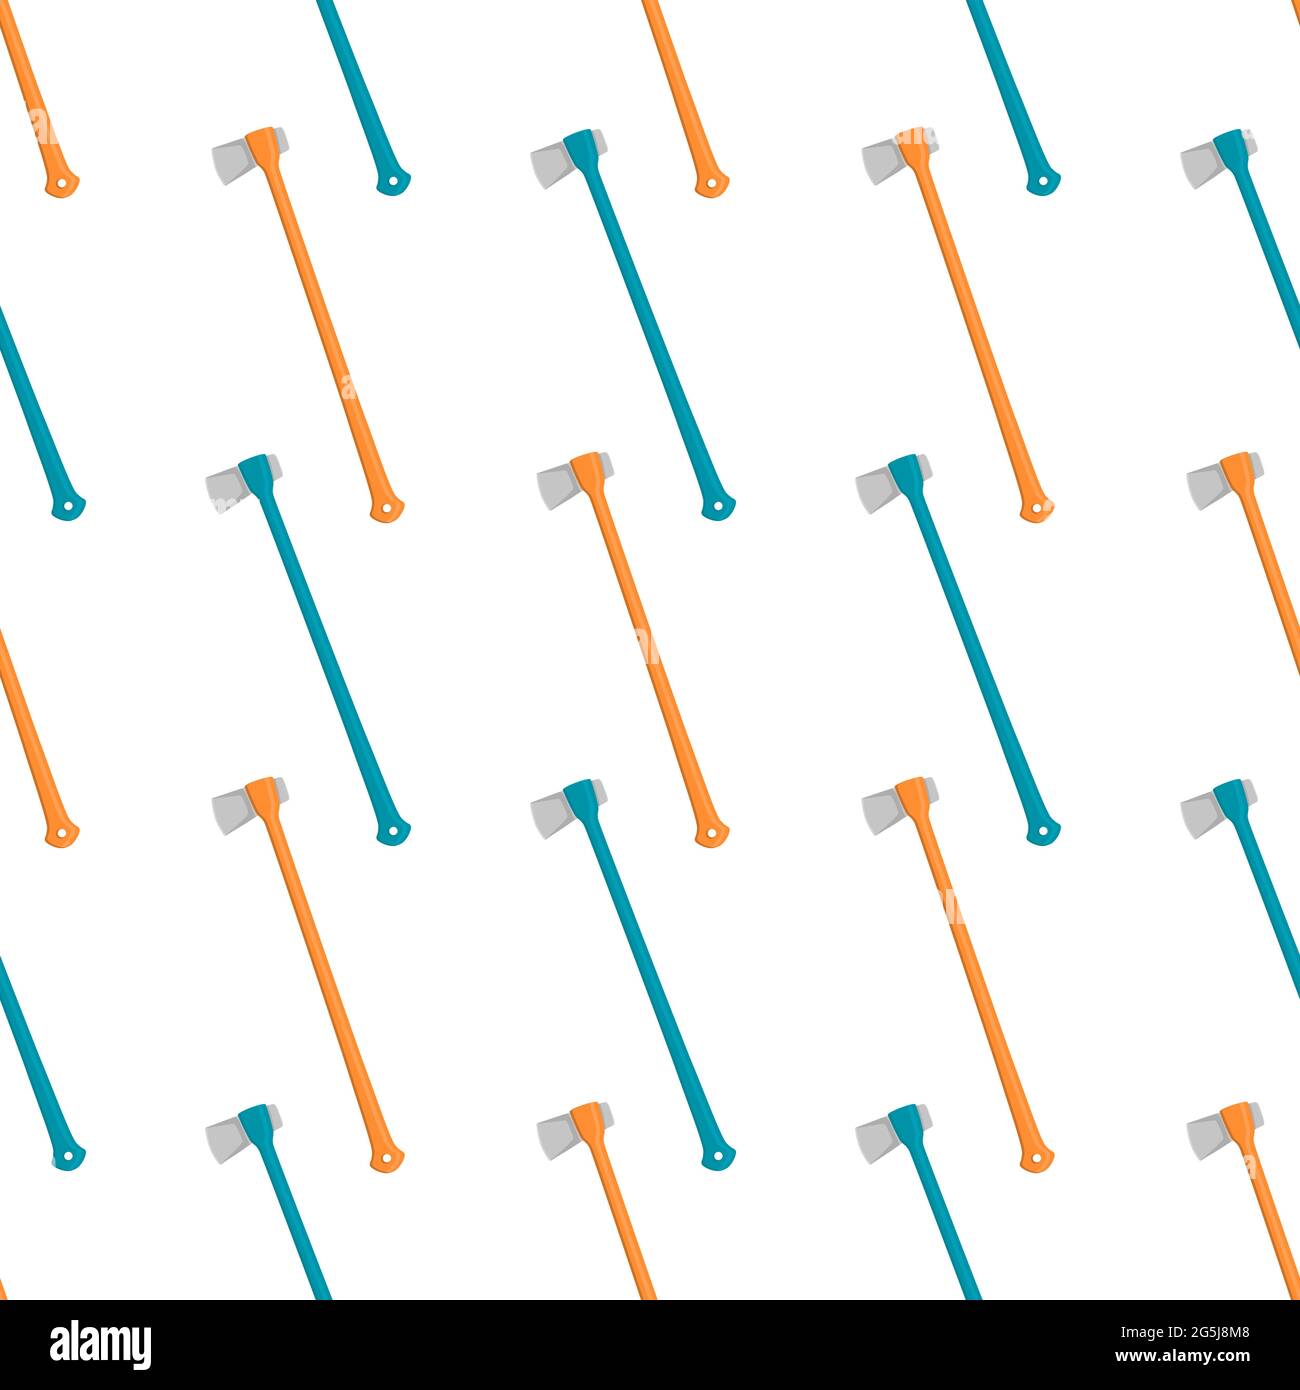 Illustration on theme pattern steel axes with wooden handle, metal ax for hunting. Big kit ax consisting of many identical axes on white background. F Stock Vector